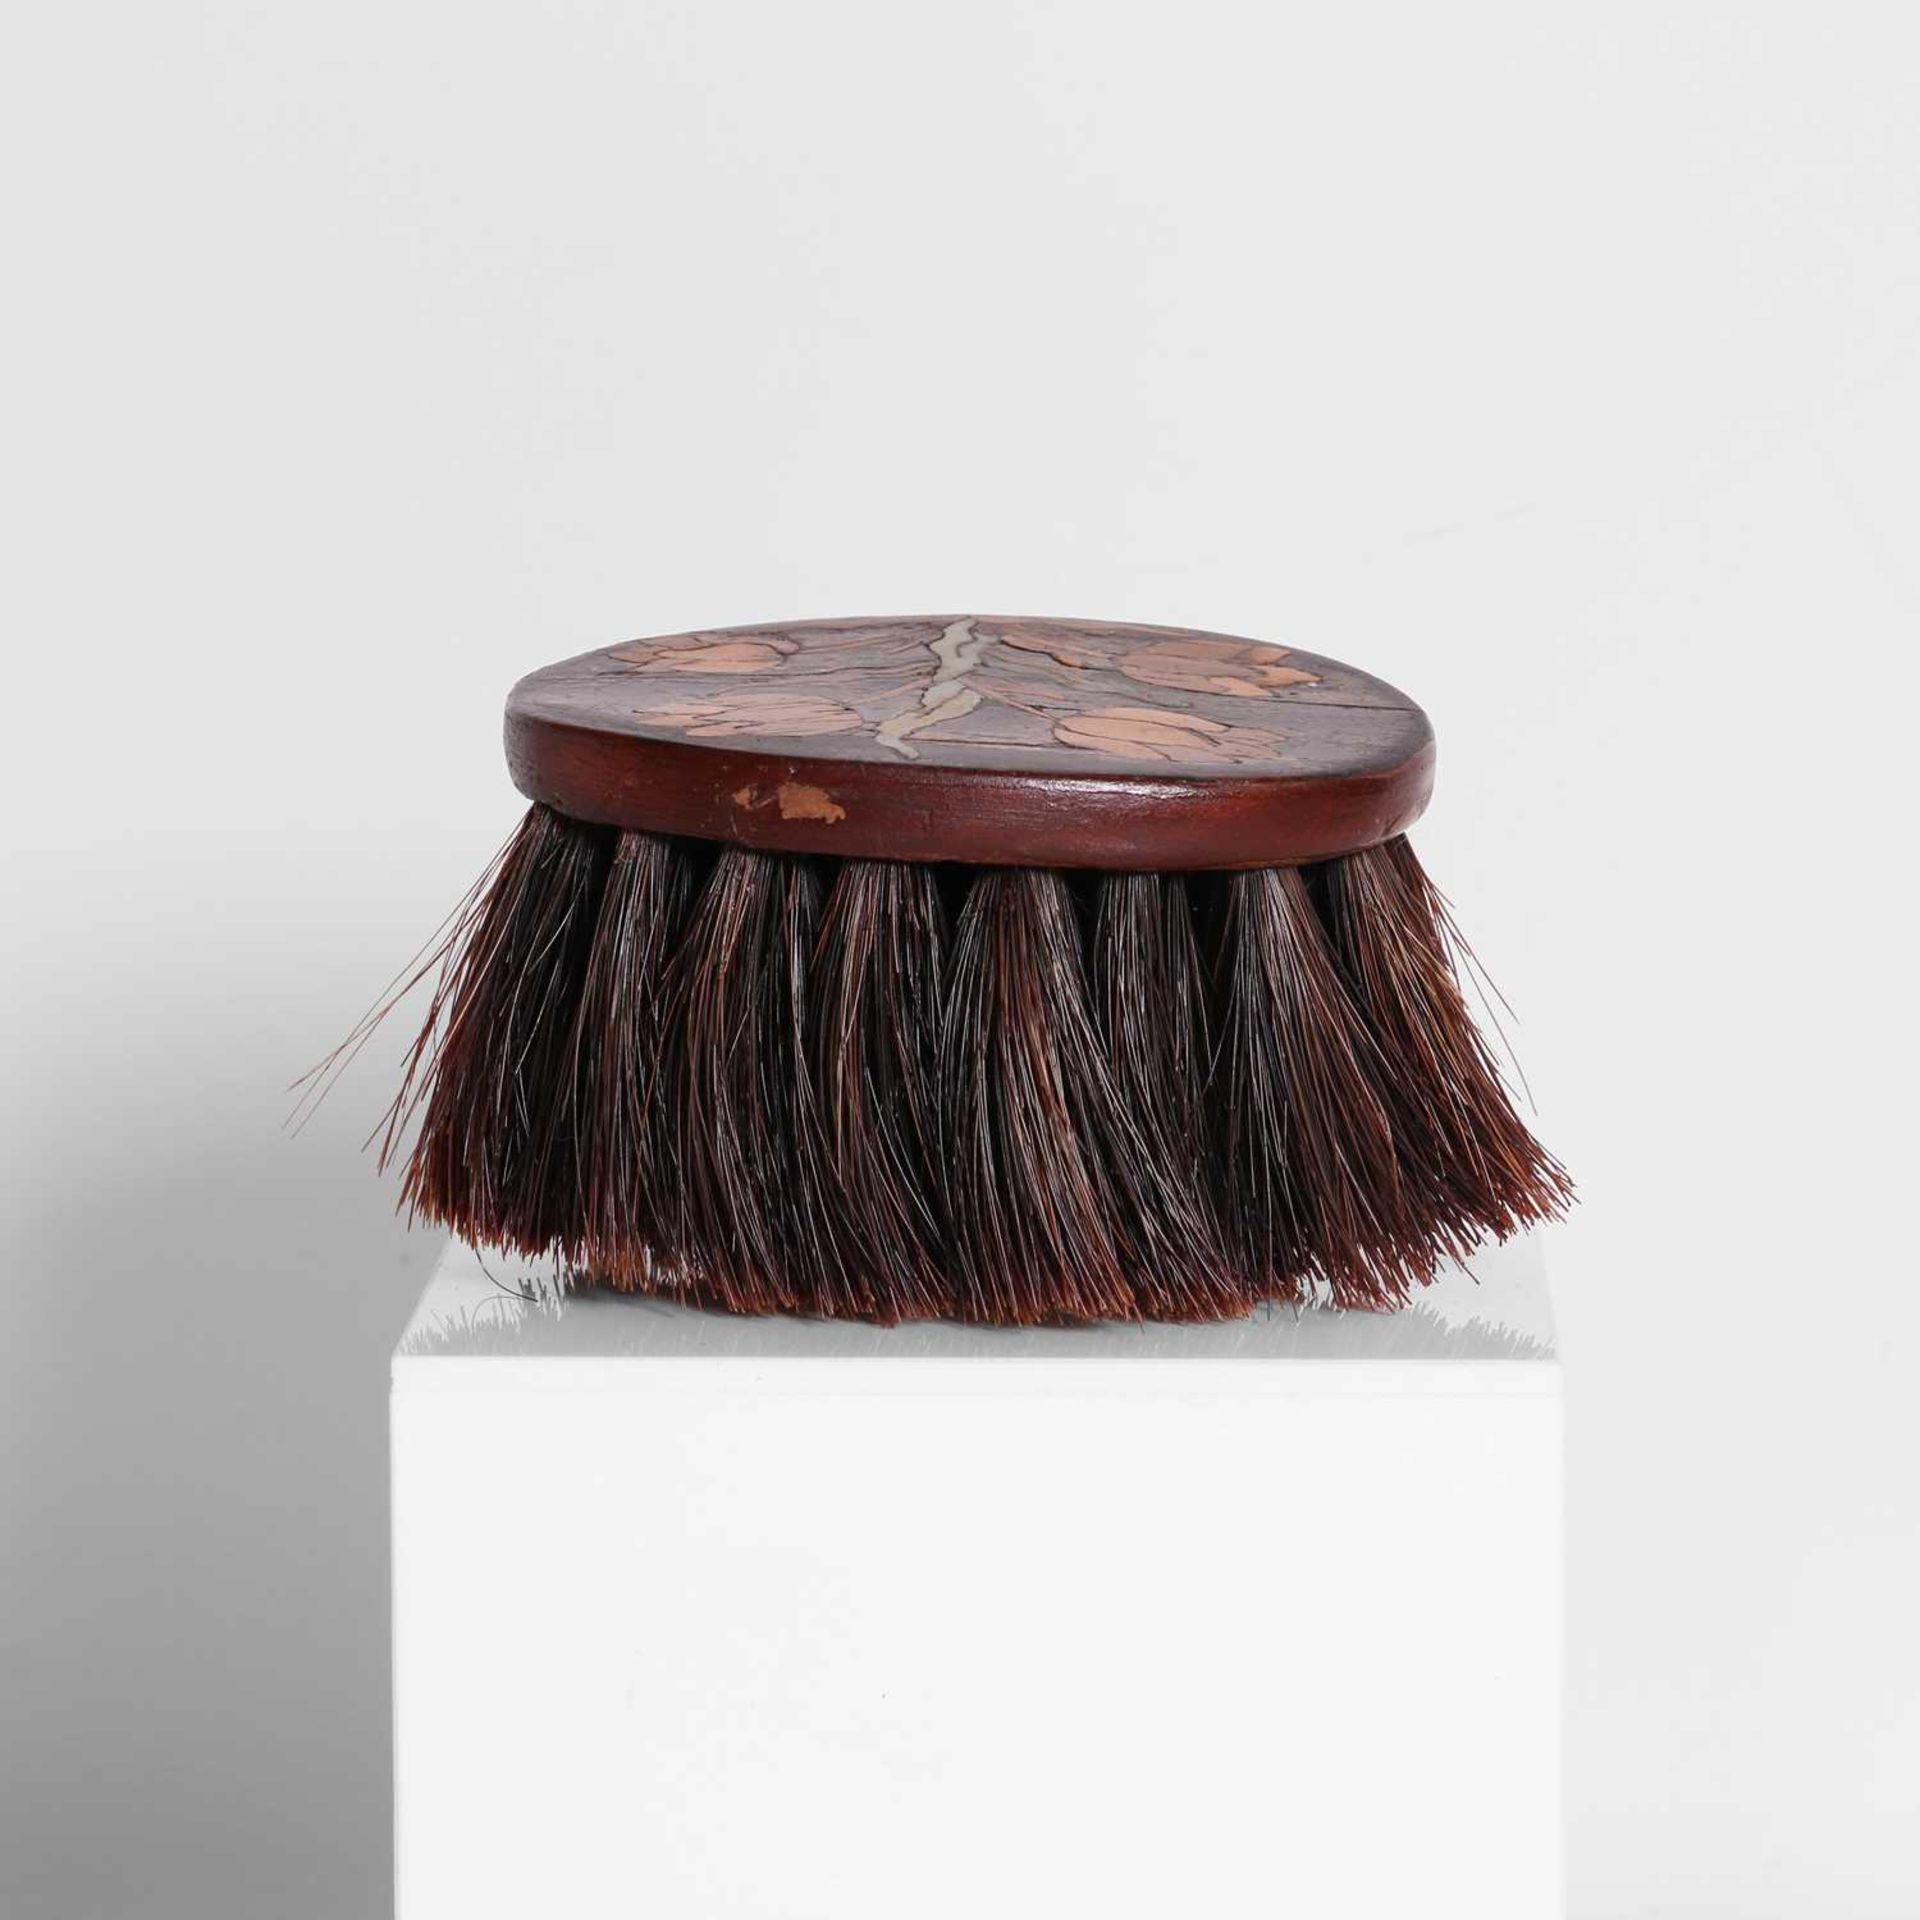 A specimen-wood-inlaid clothes brush, - Image 3 of 22